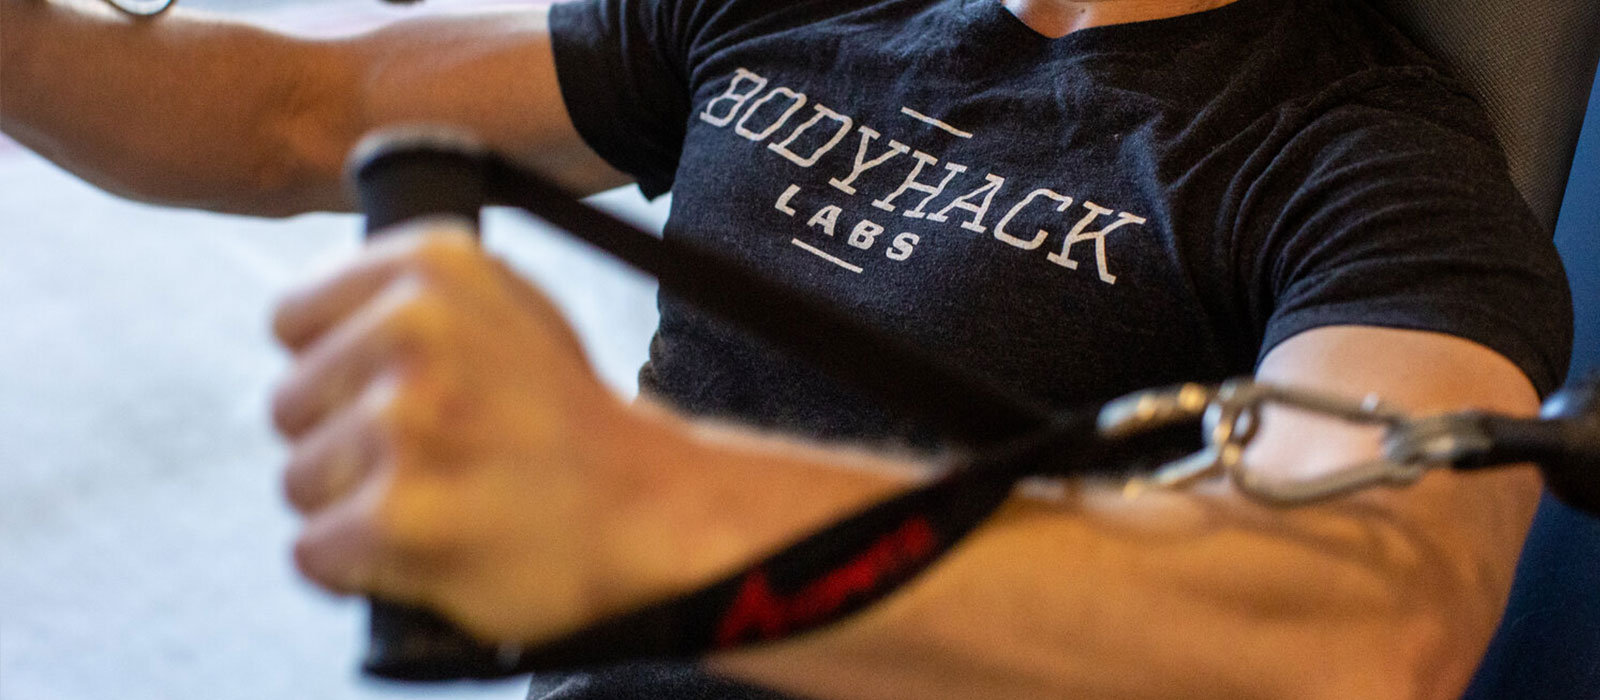 Bodyhack Labs: Waco’s Totally New Approach to Fitness